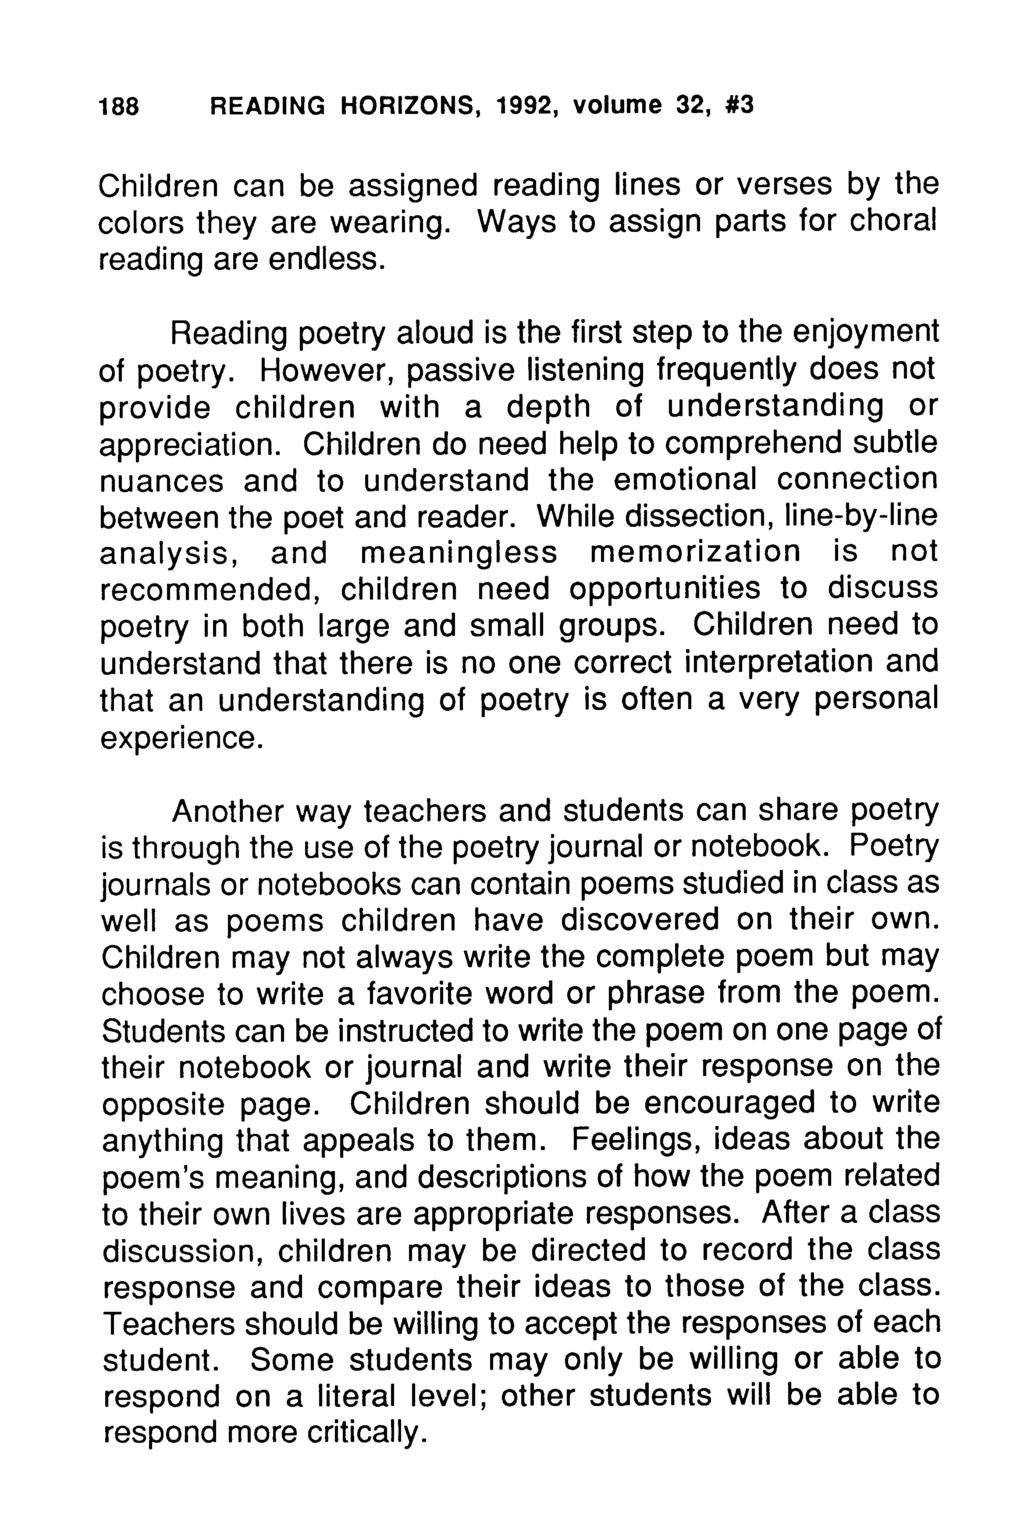 188 READING HORIZONS, 1992, volume 32, #3 Children can be assigned reading lines or verses by the colors they are wearing. Ways to assign parts for choral reading are endless.